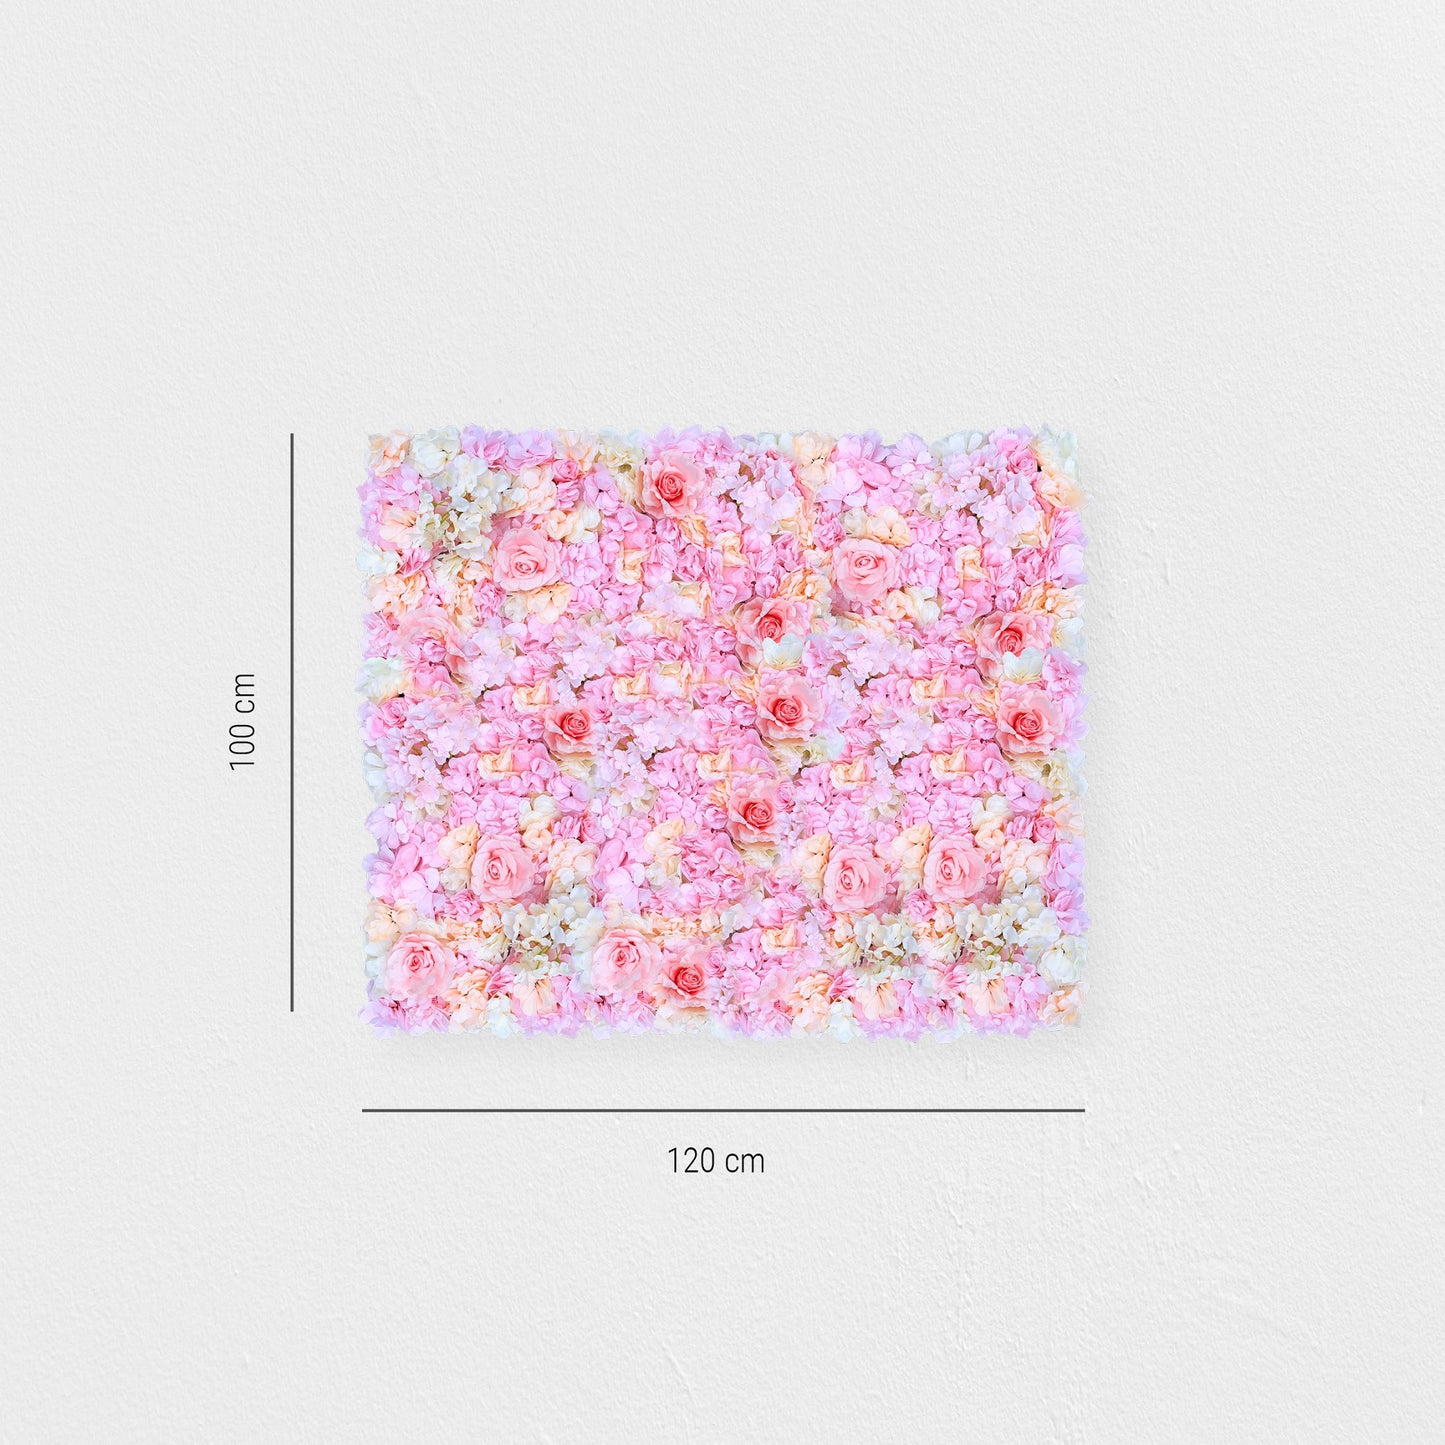 Flower wall "CREAMY CUPCAKE" made of Realtouch artificial plants